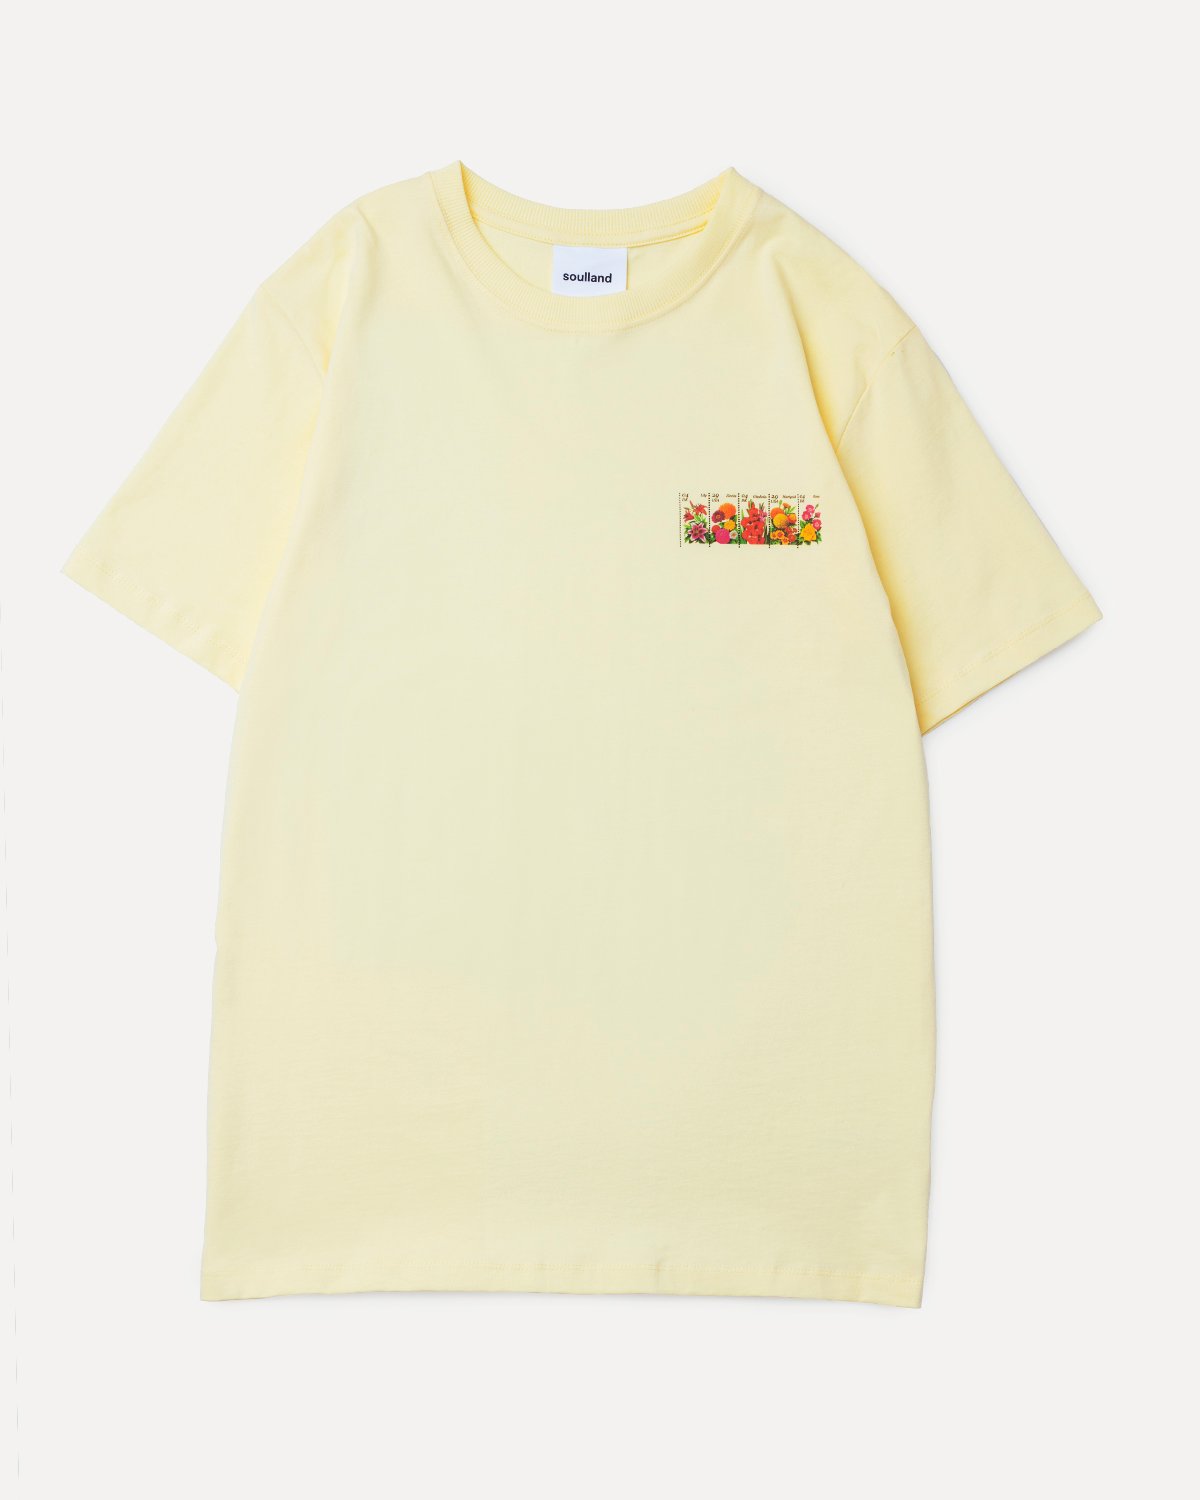 Soulland - Rossell S/S Yellow - Clothing - Yellow - Image 2